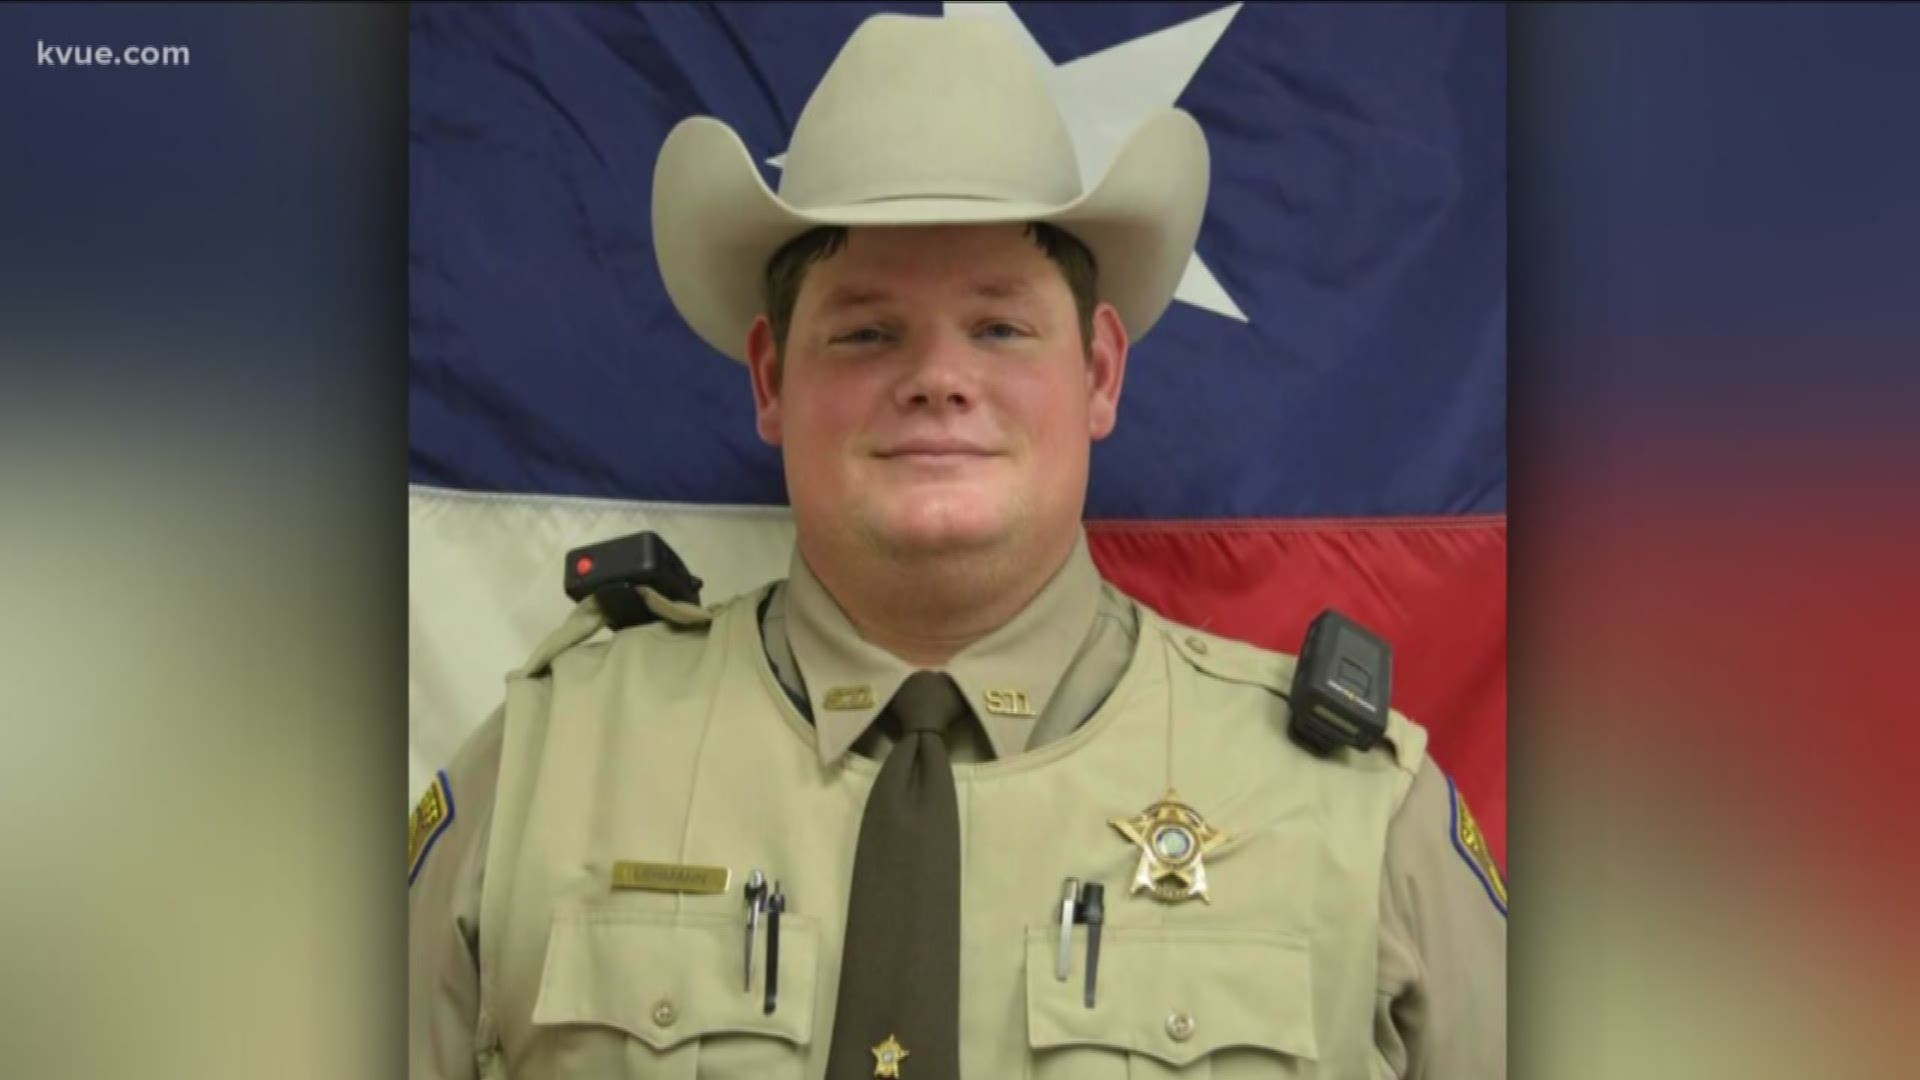 After being shot in the face in November, Fayette County Deputy Calvin Lehmann is now totally blind.